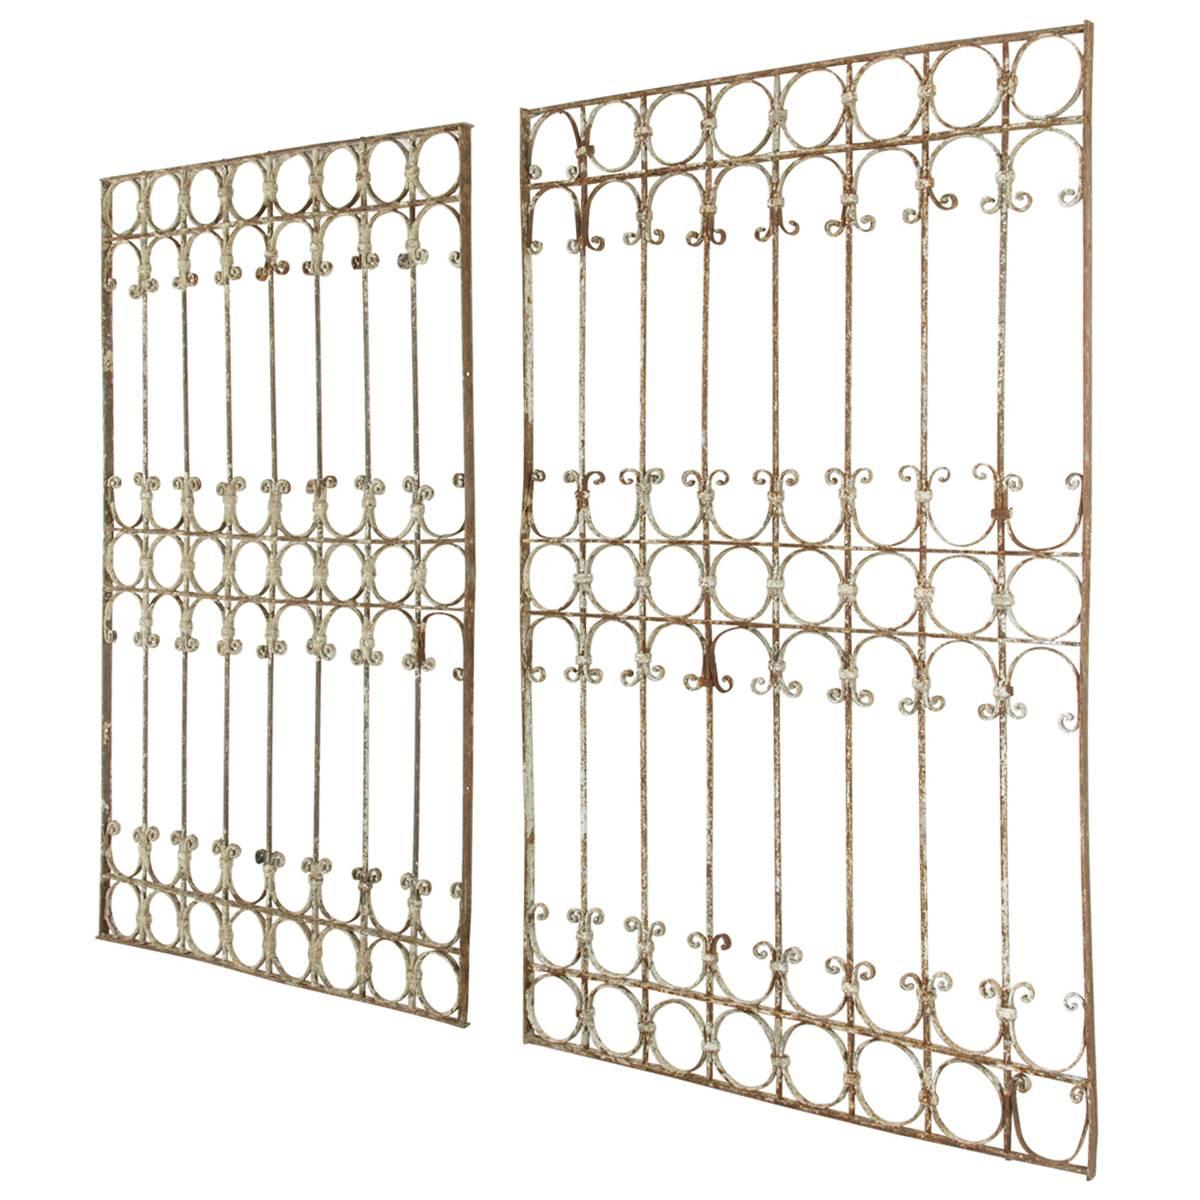 Pair of Large French Hand-Forged Iron Partitions, Grills, Gates